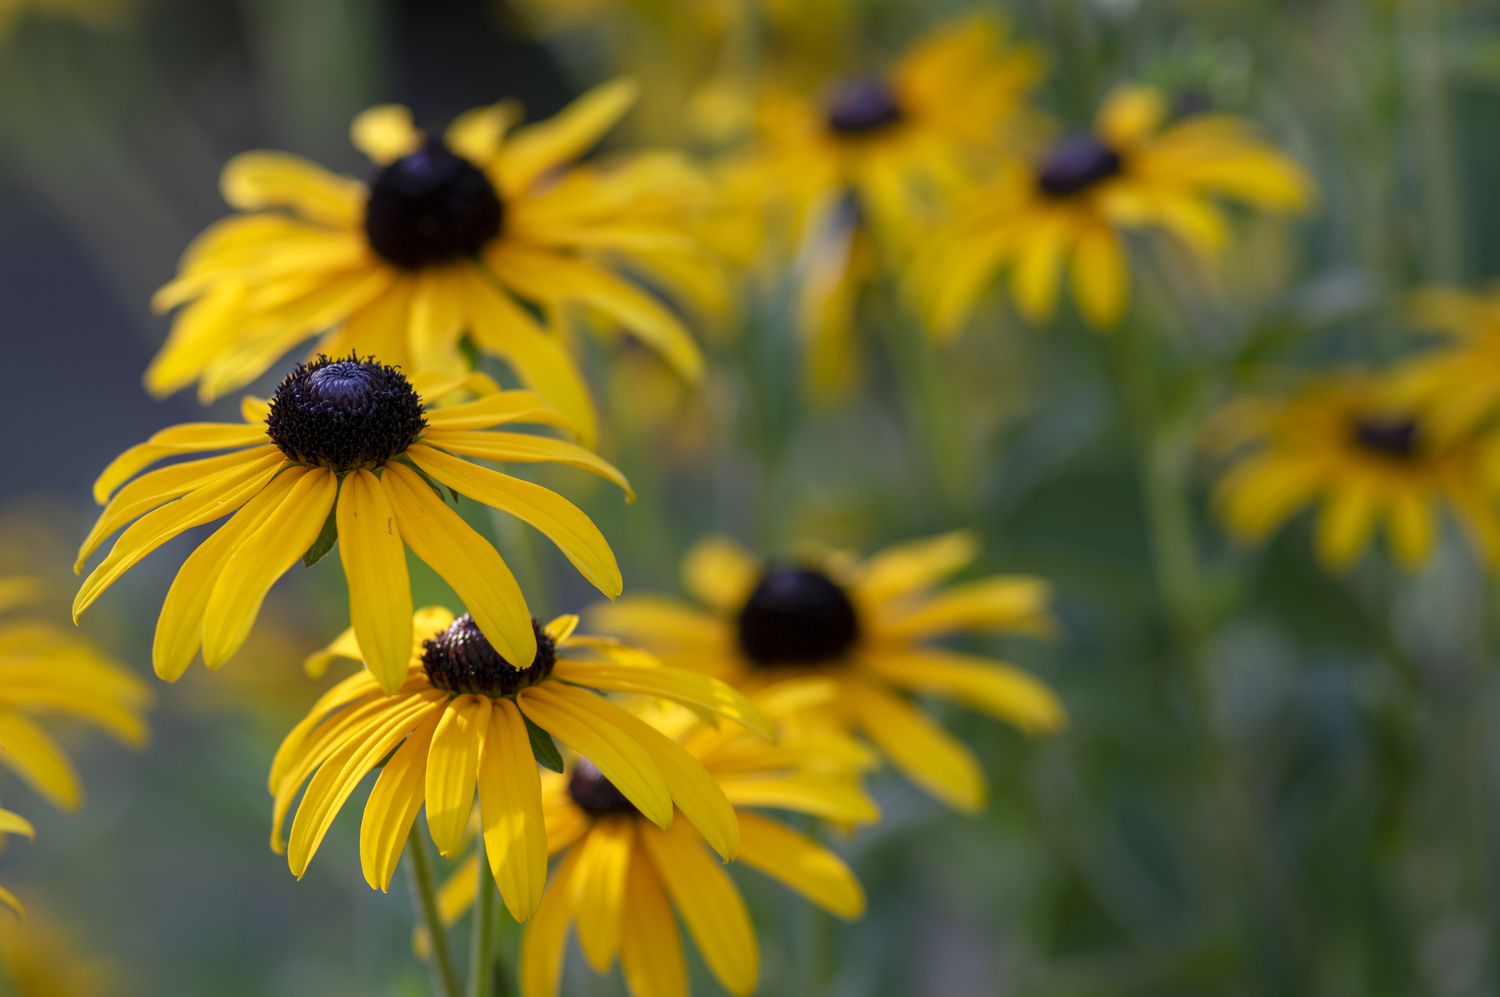 Rudbeckia hirta yellow flower with black brown center in bloom, black eyed susan in the garden